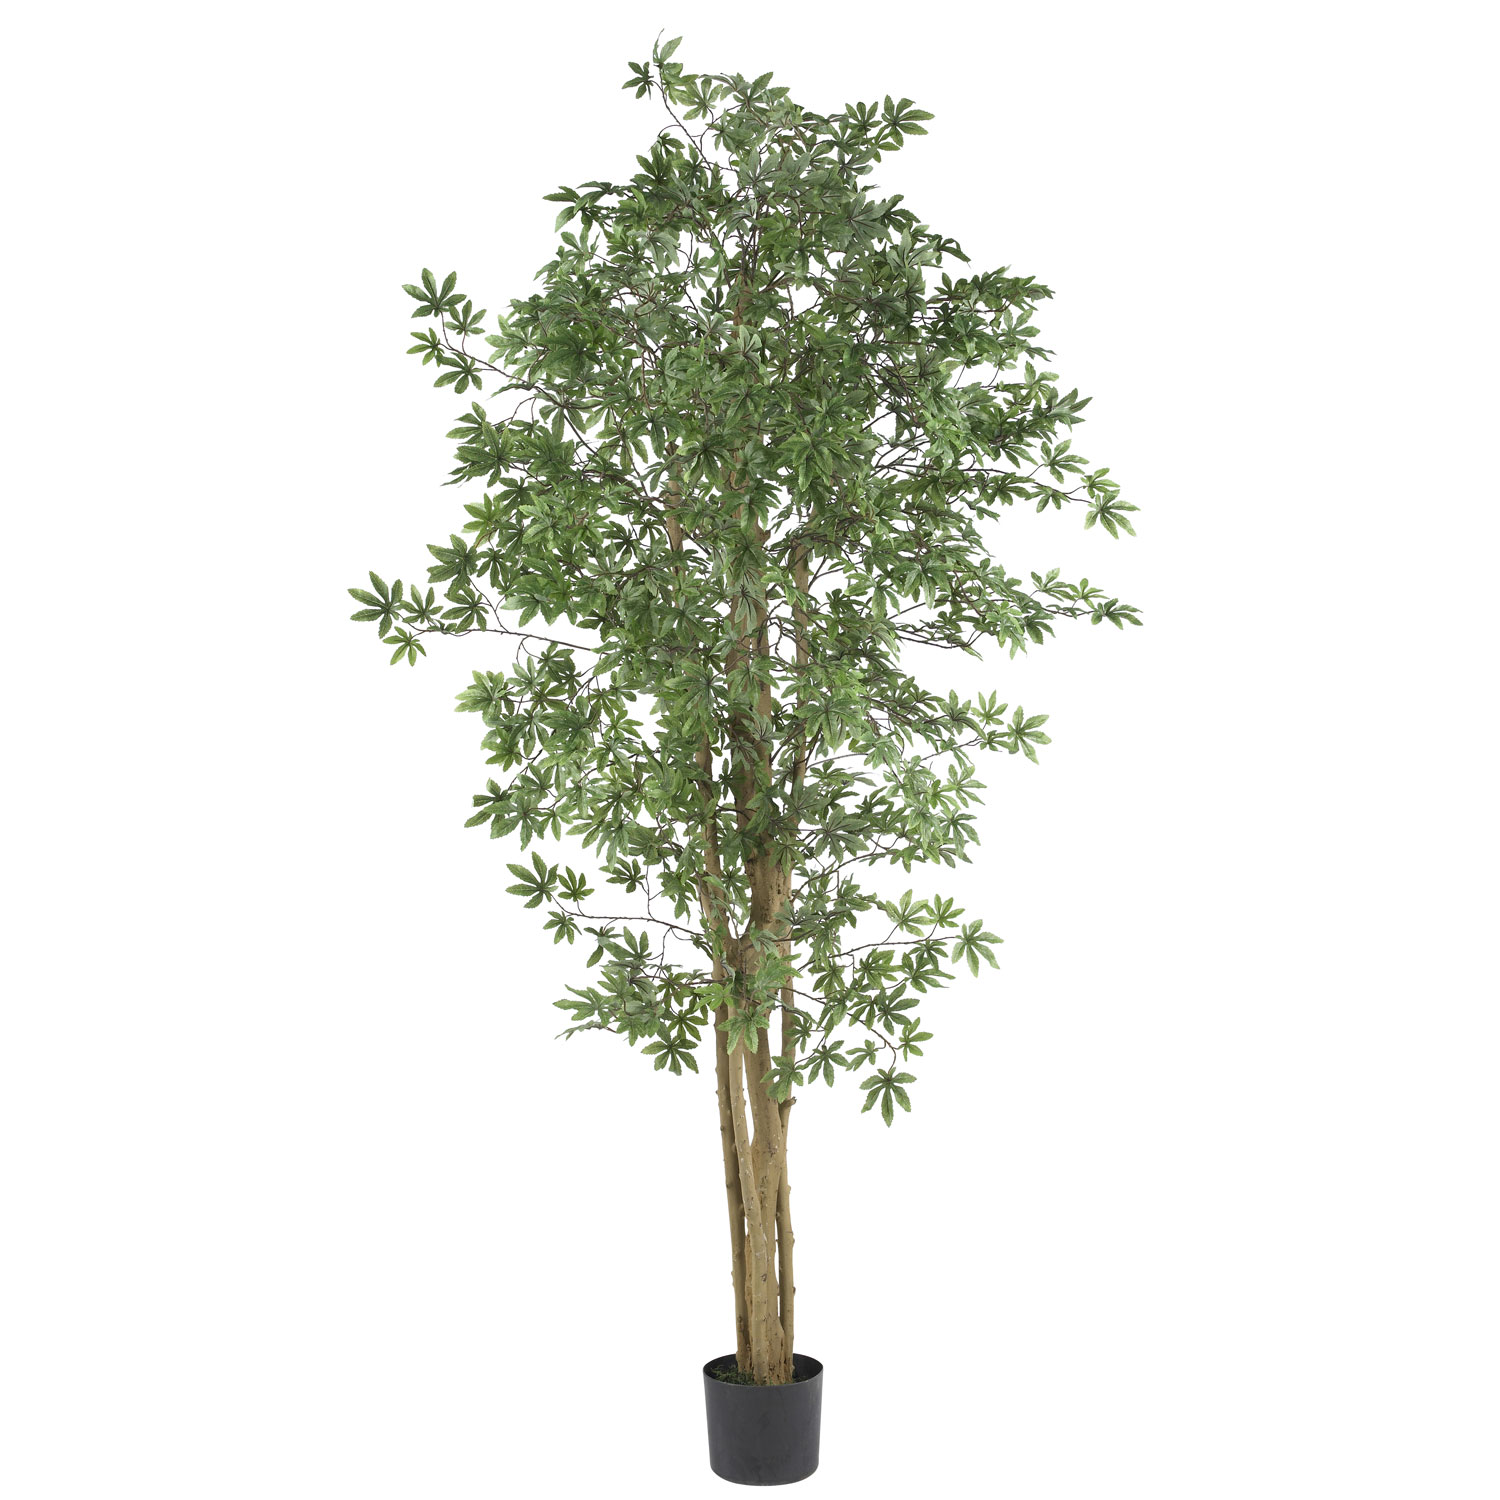 6 Foot Japanese Maple Tree: Potted